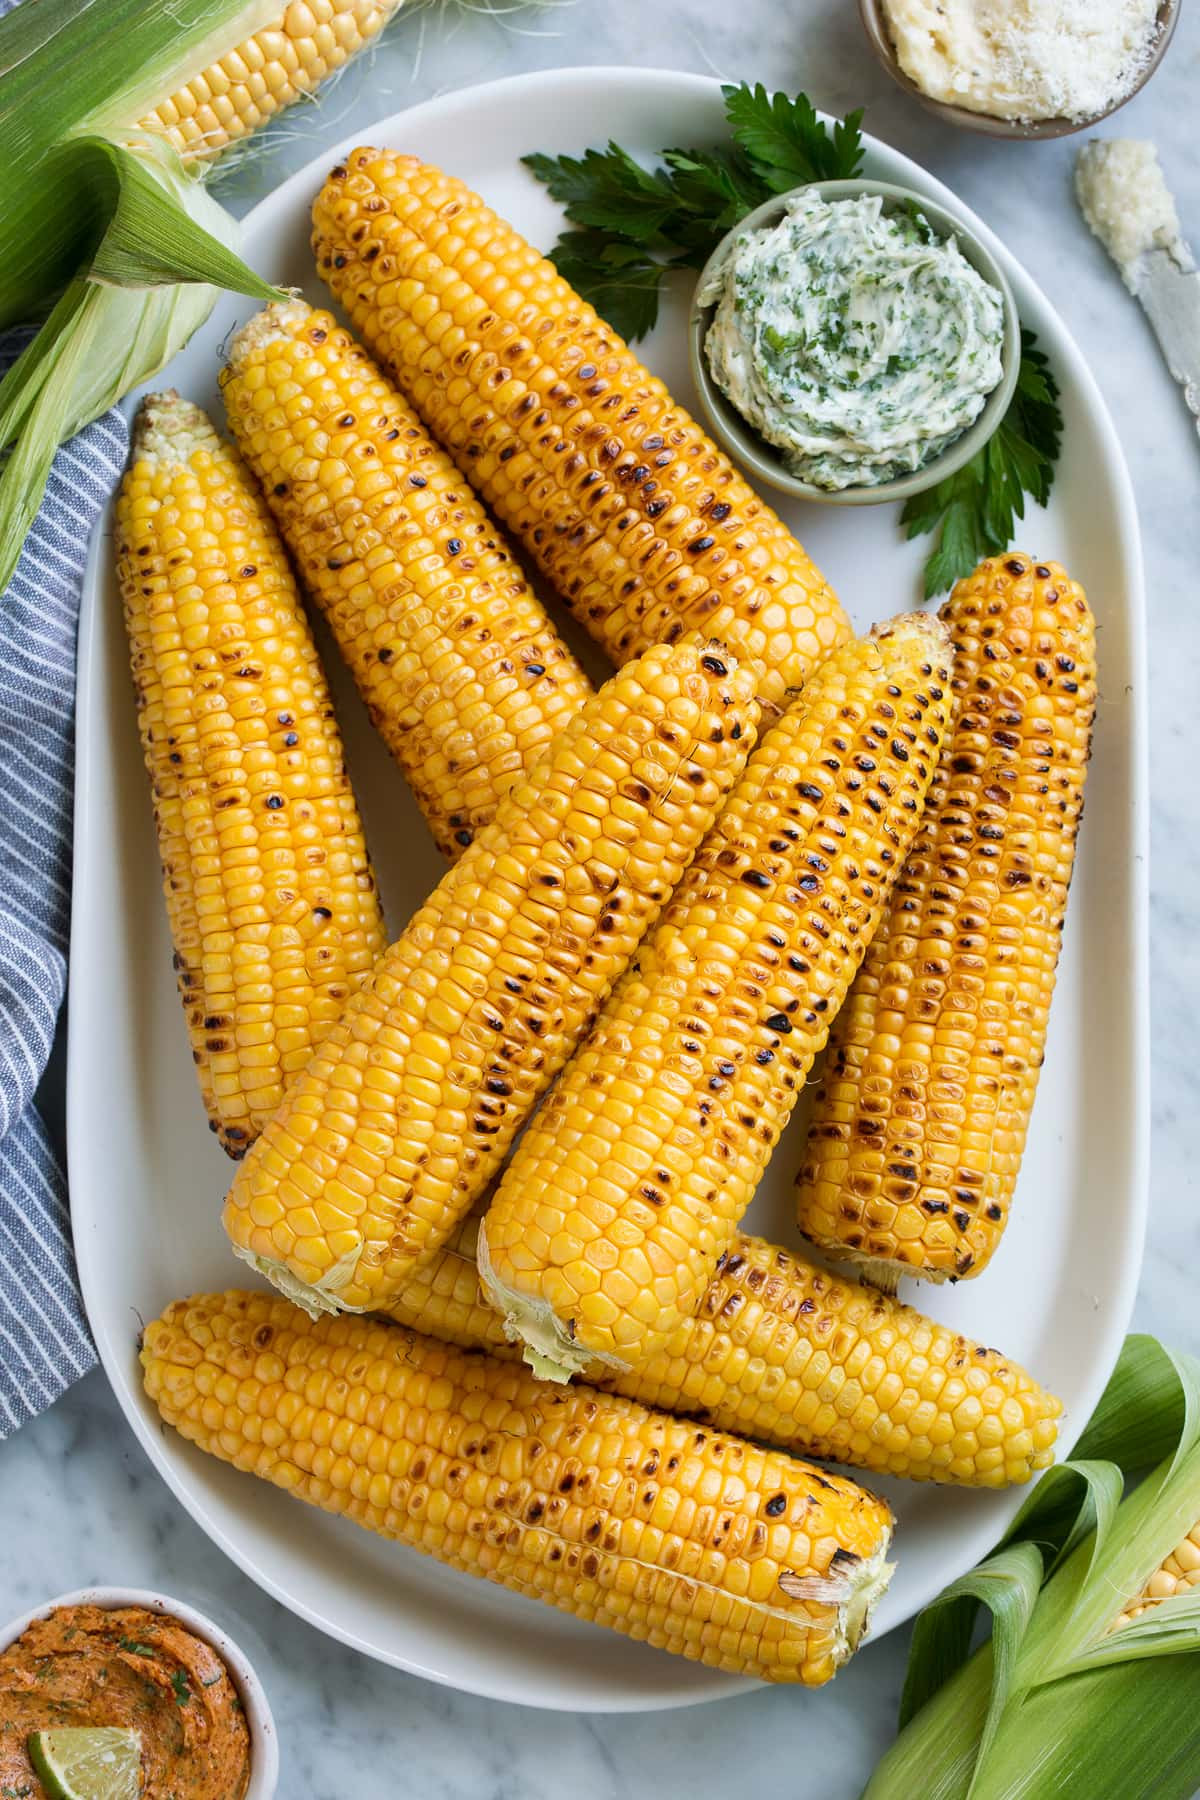 15 Healthy Cook Corn On the Grill